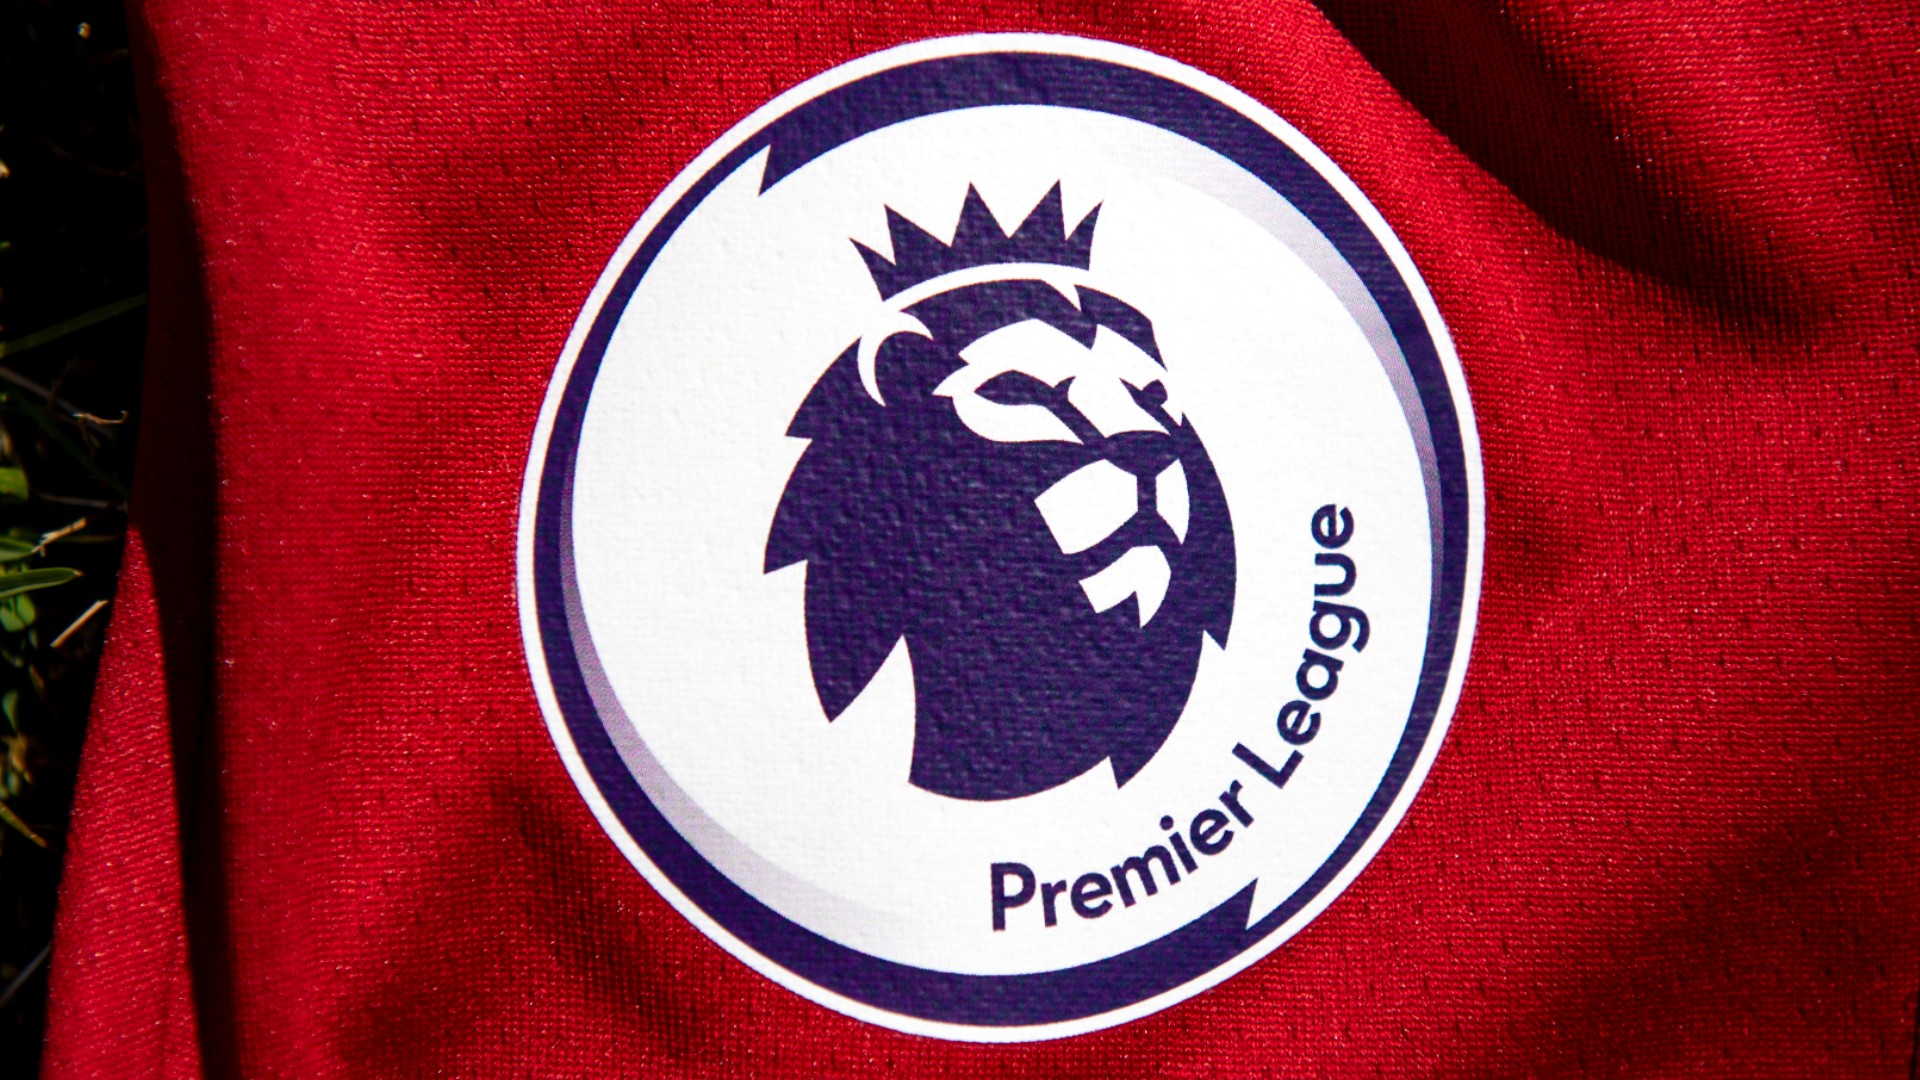 English Premier League odds, traces, overs & unders: Up to date betting information and picks